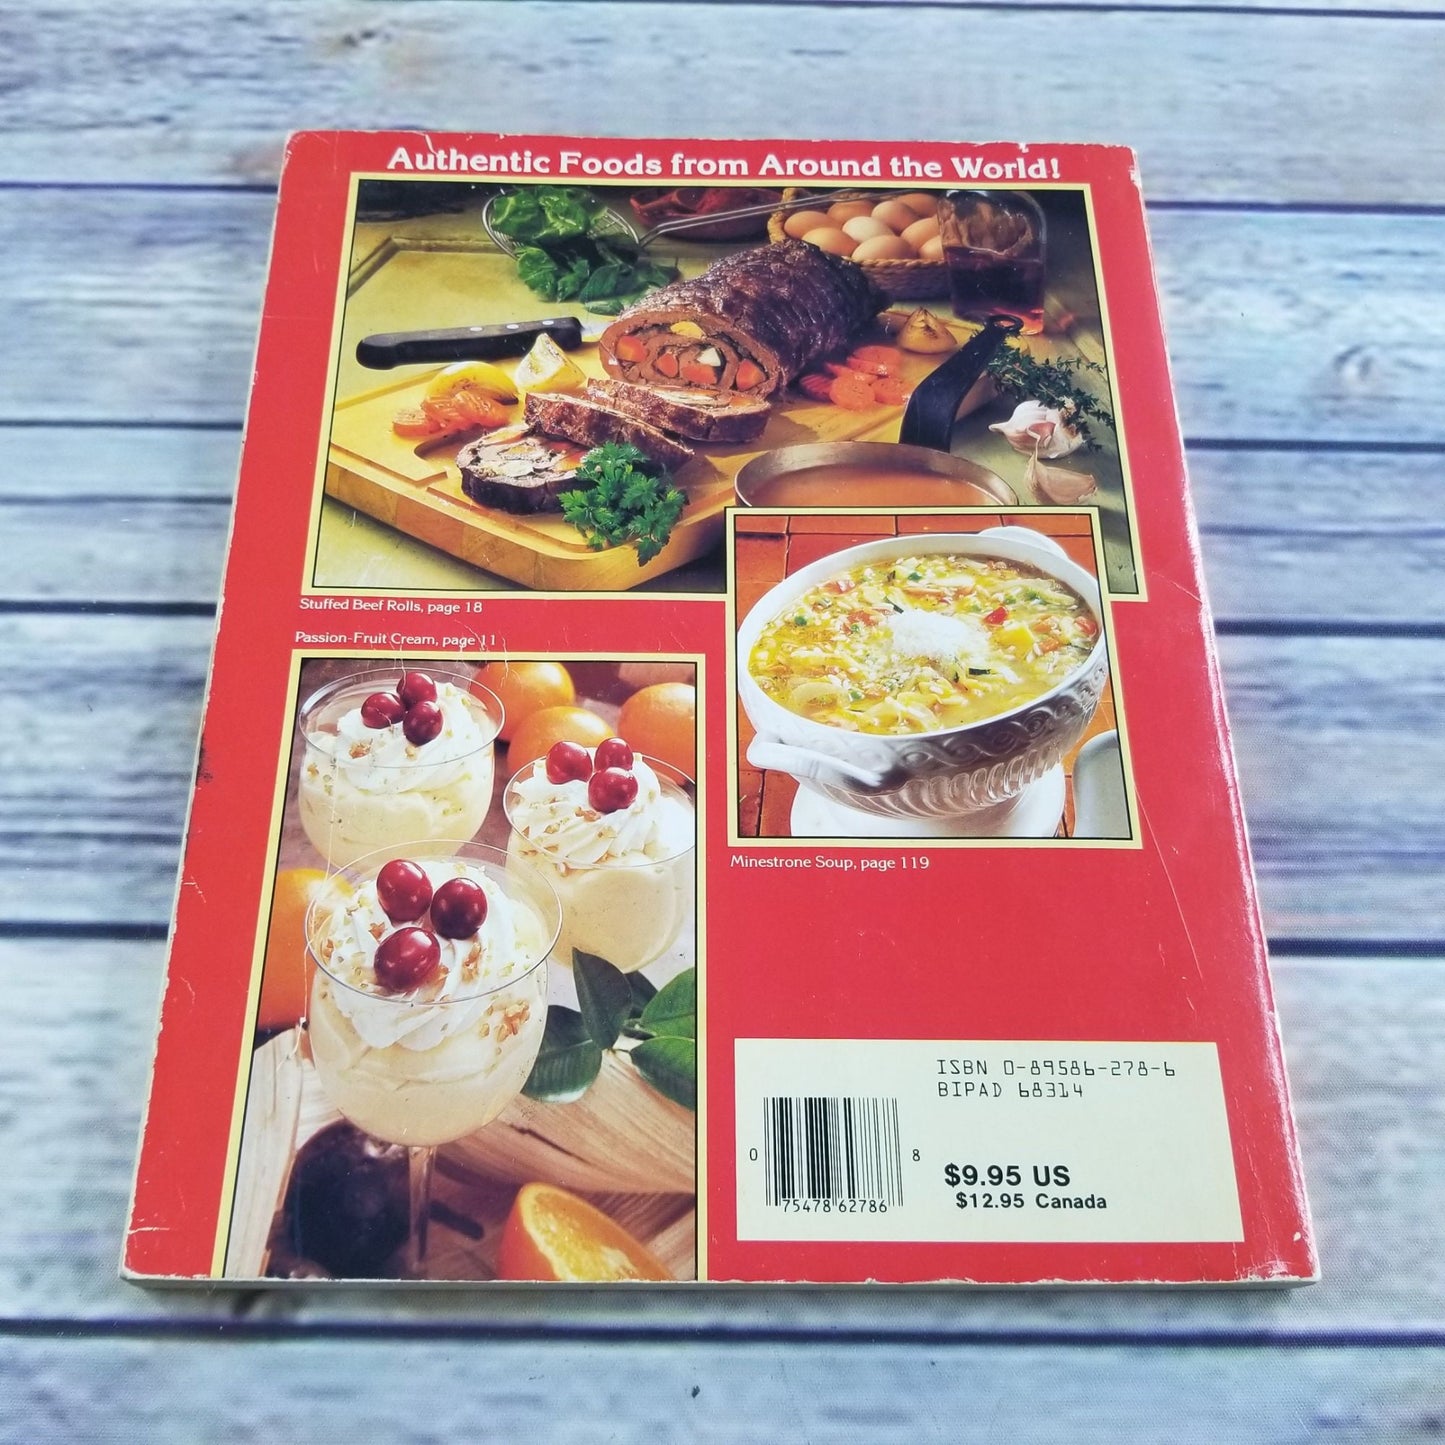 Vintage Cookbook Best of International Cooking Recipes 1984 Annette Wolter and Christian Teubner Paperback HP Books 1980s